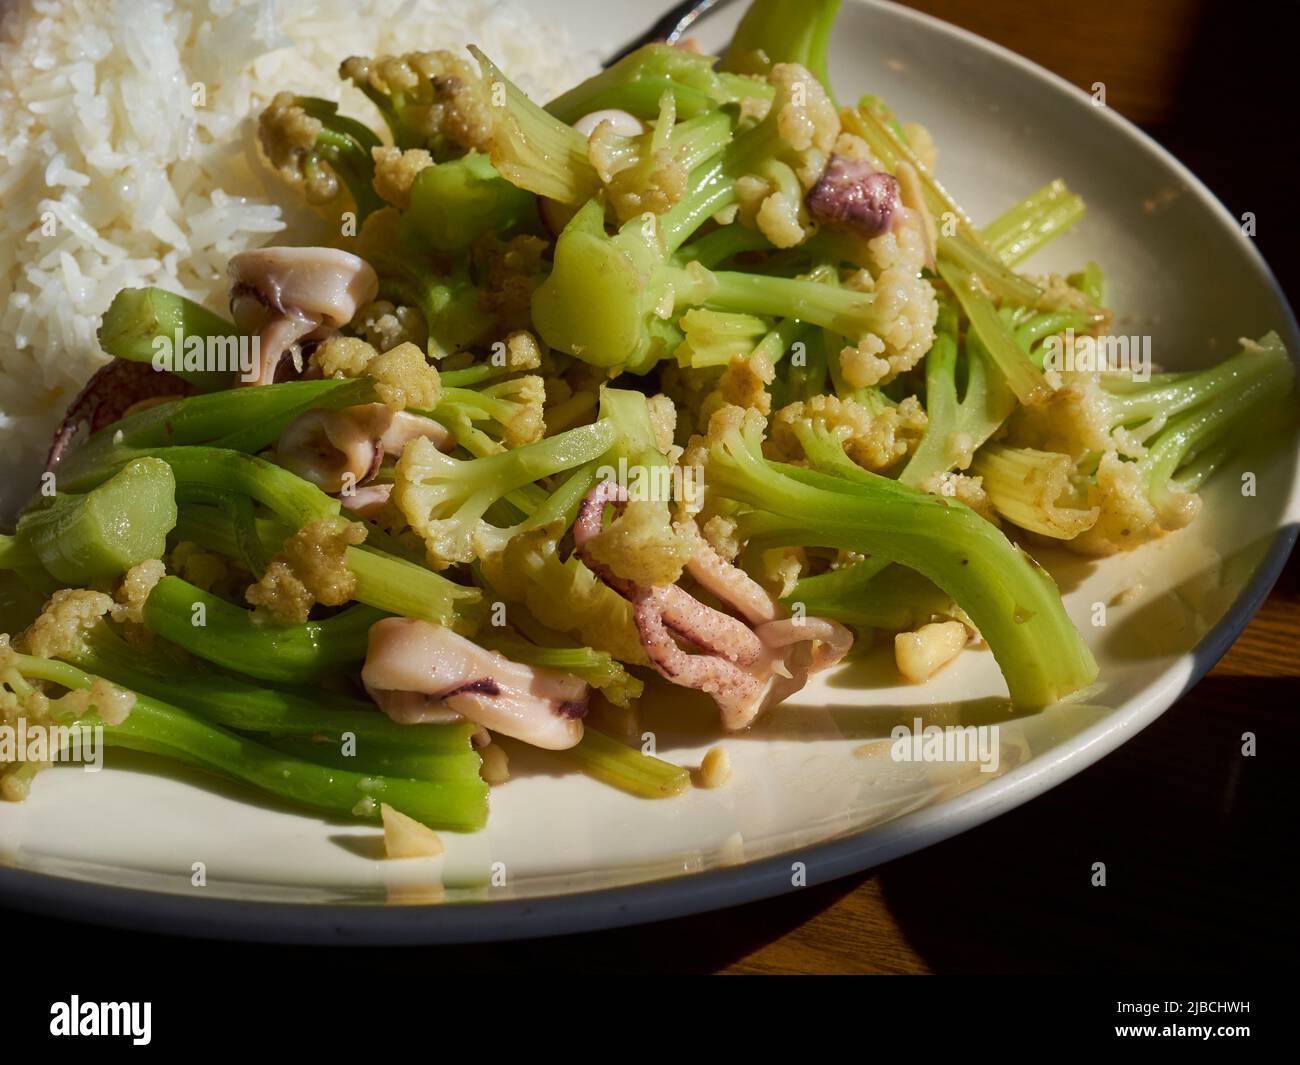 A plate of squid with Chinese cauliflower from a restaurant in Elmhurst, Queens, New York, USA Stock Photo